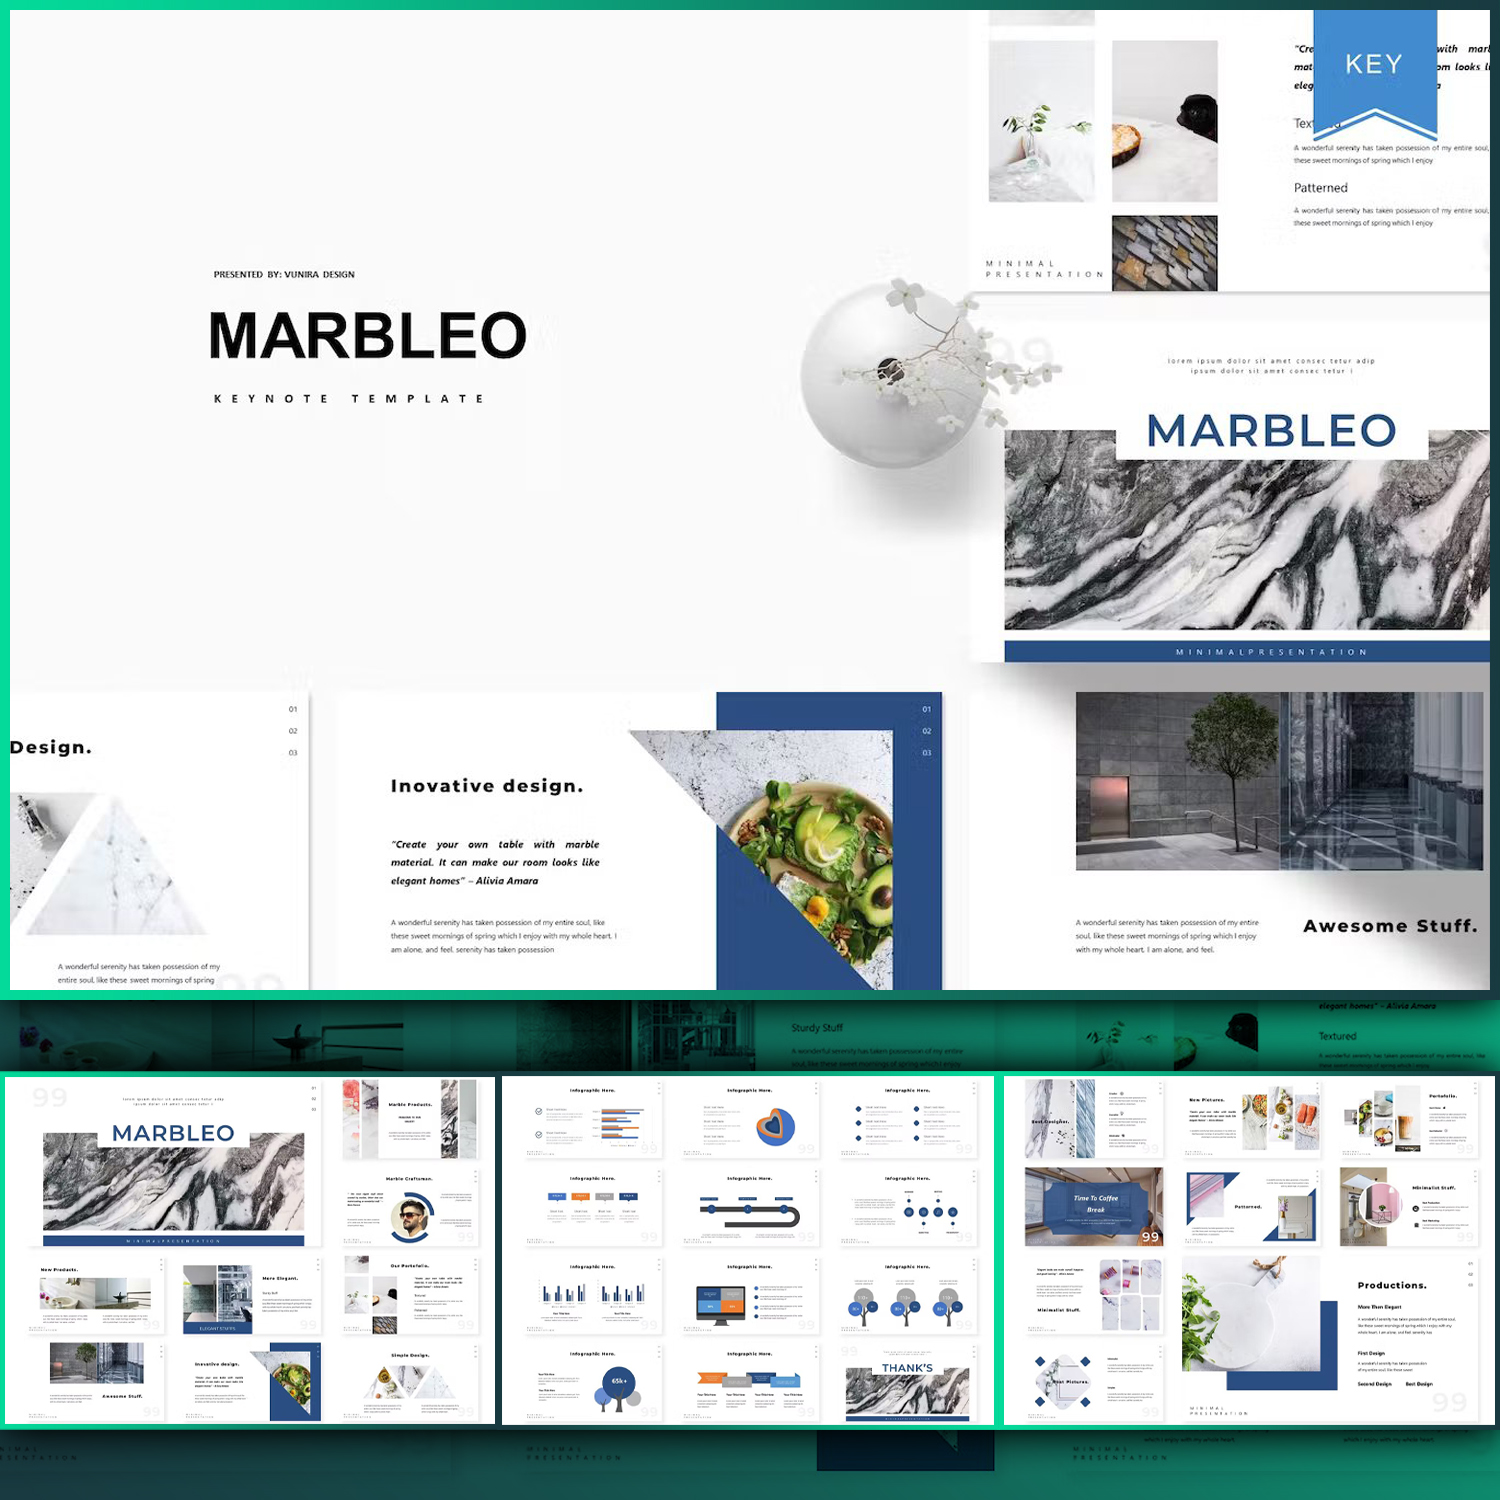 Images preview marbleo keynote template.